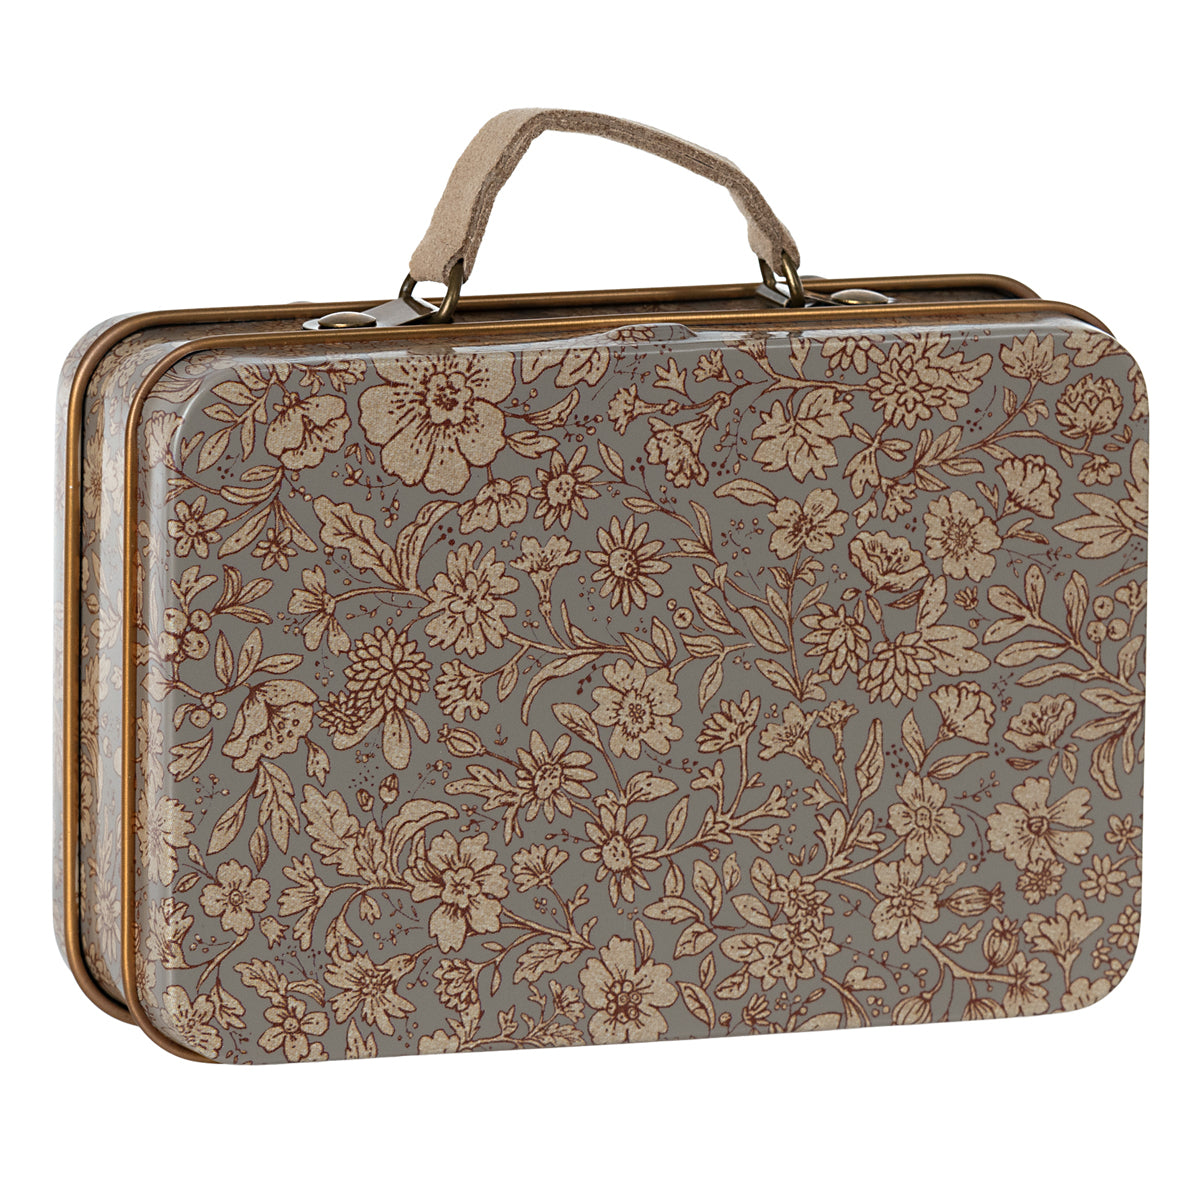 Maileg Small Suitcase, Blossom - Grey 19-3602-01